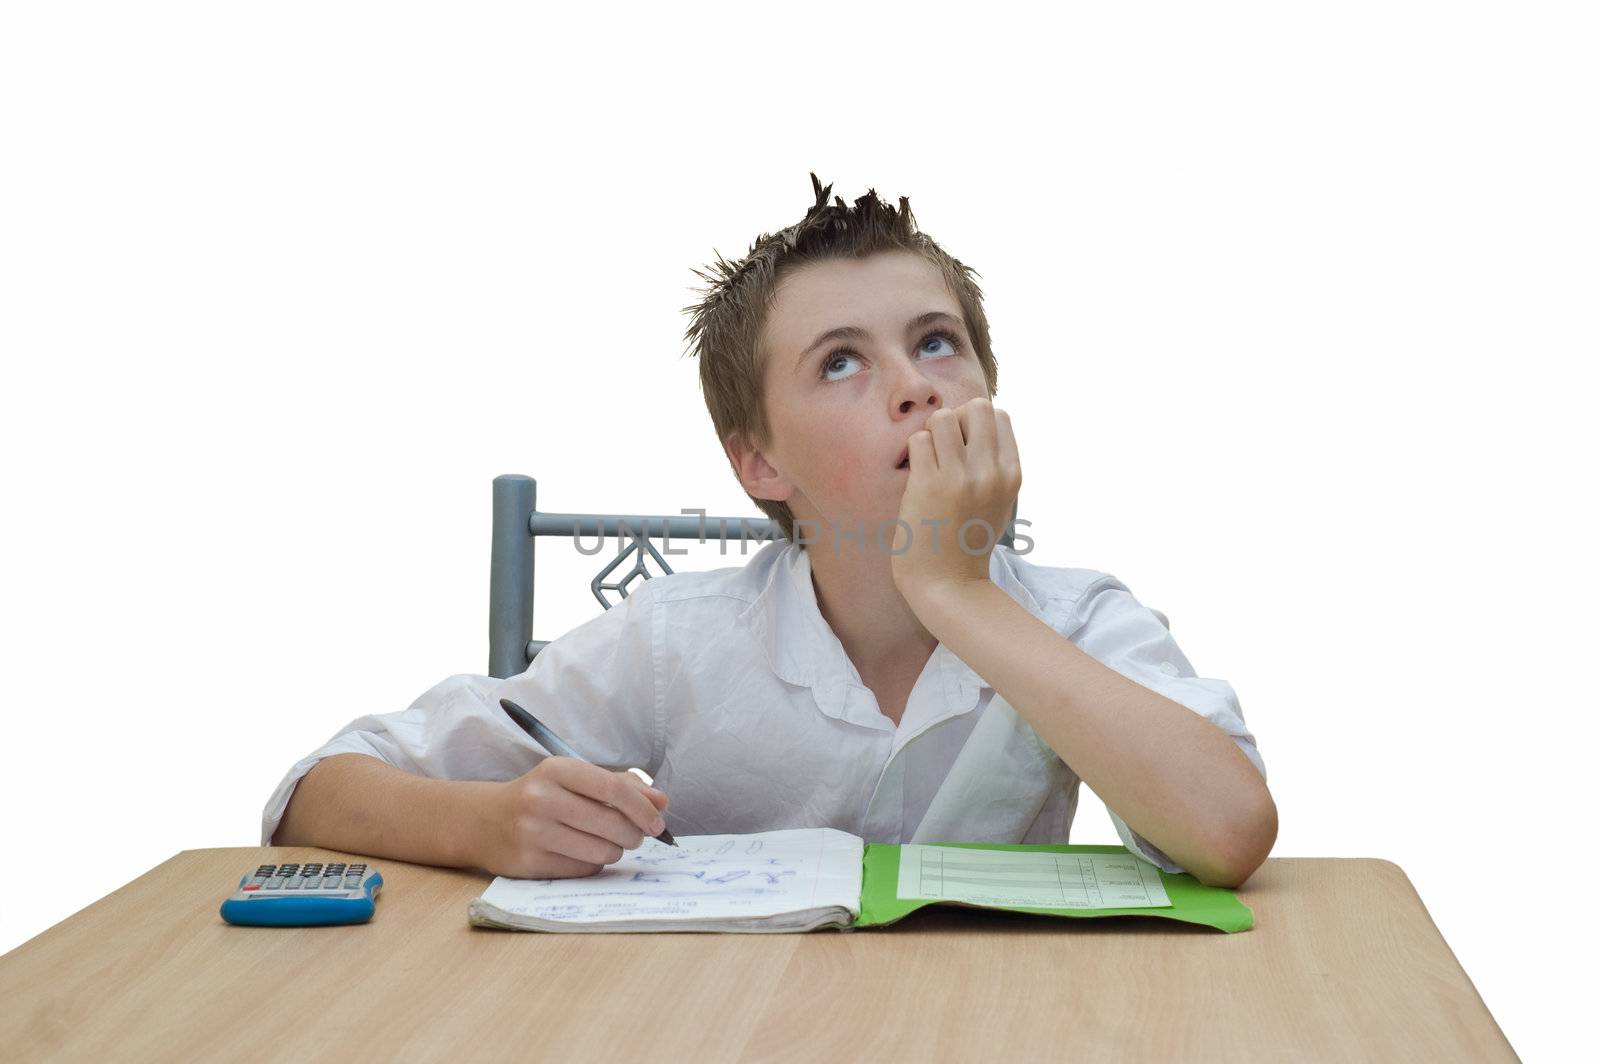 an image of a student looking upwards and biting his finger nails while trying to work out a problem.